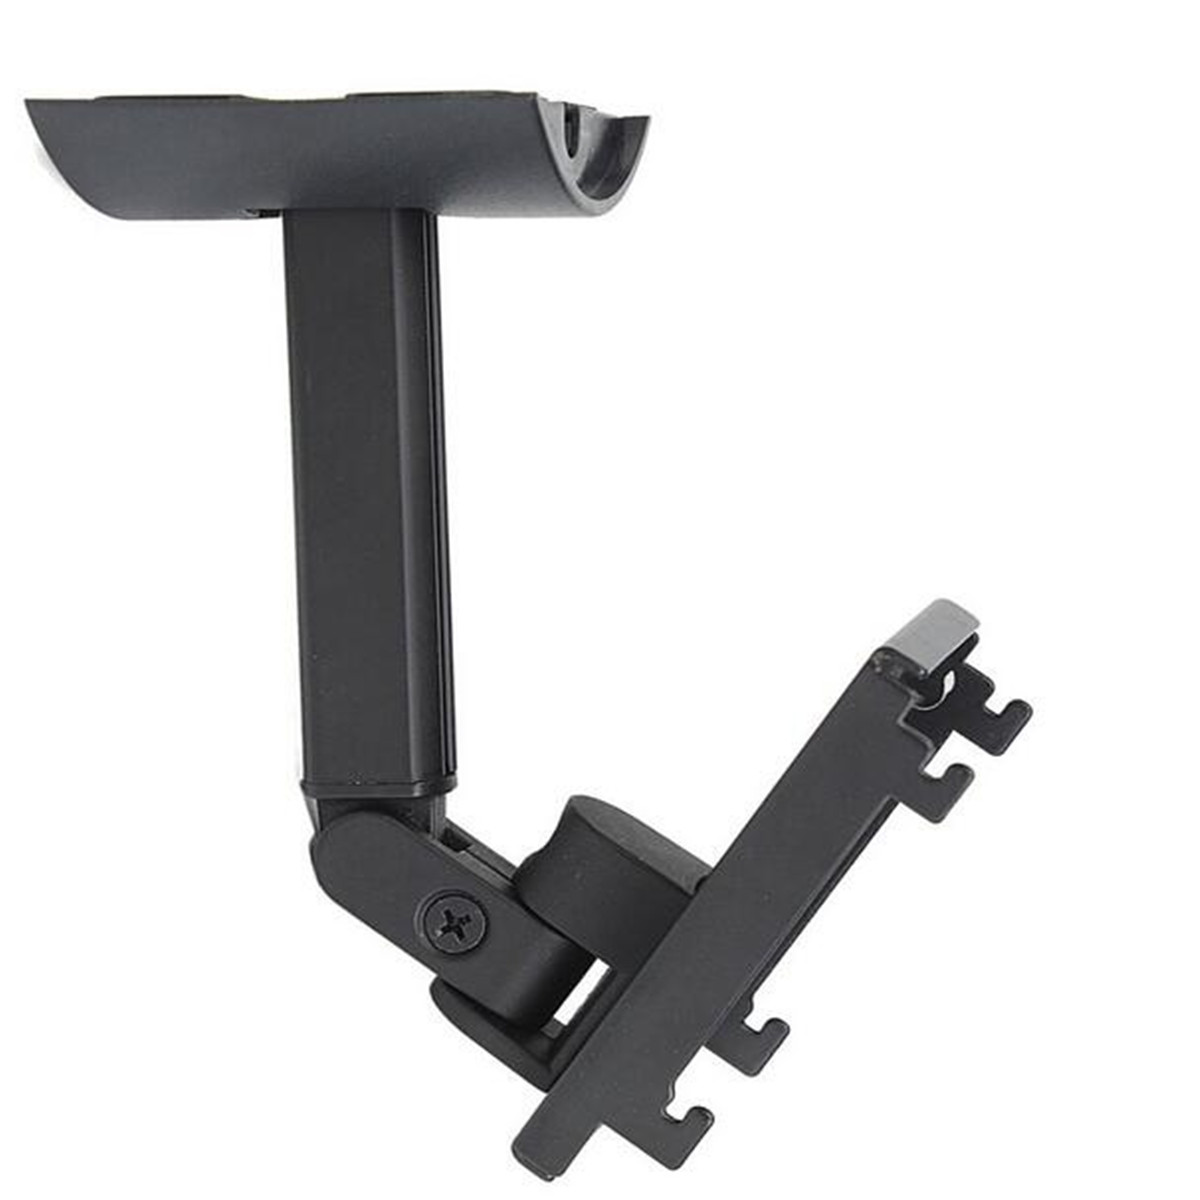 LEORY Universal Stainless Steel Wall Mount Speaker Bracket Speaker Holder Mount Stand with Mount Accessories